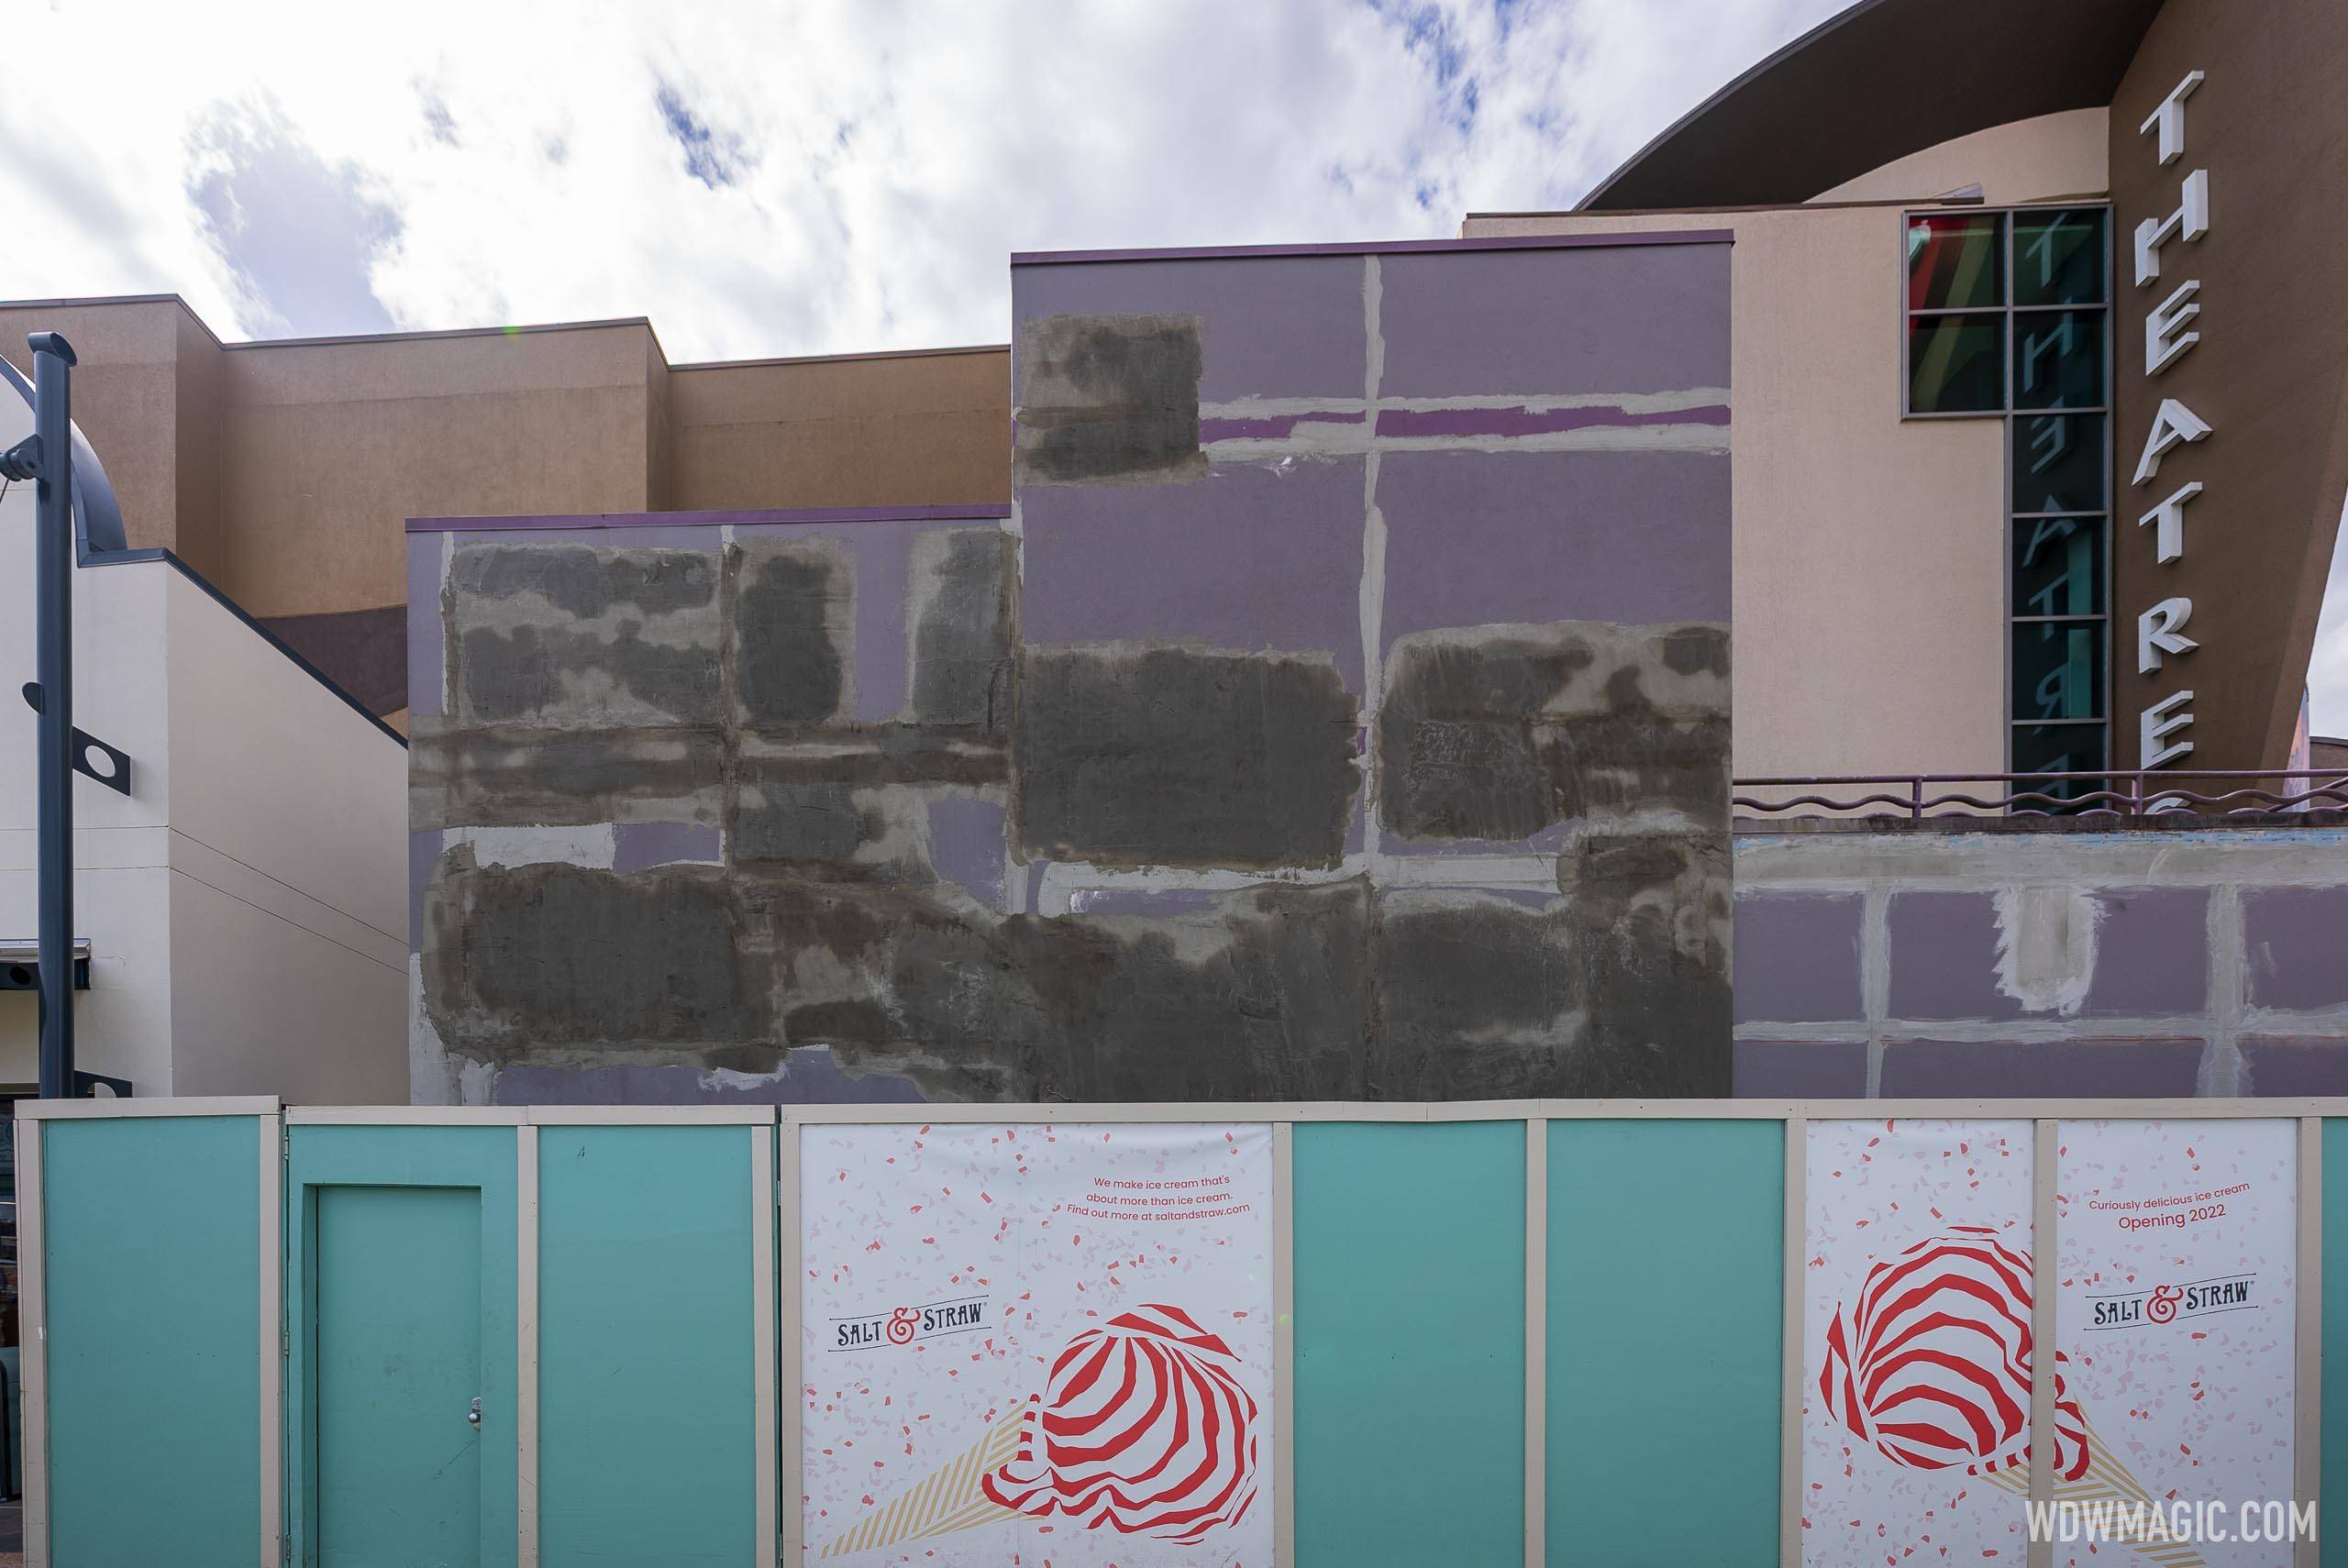 Salt and Straw Disney Springs construction - March 14 2022